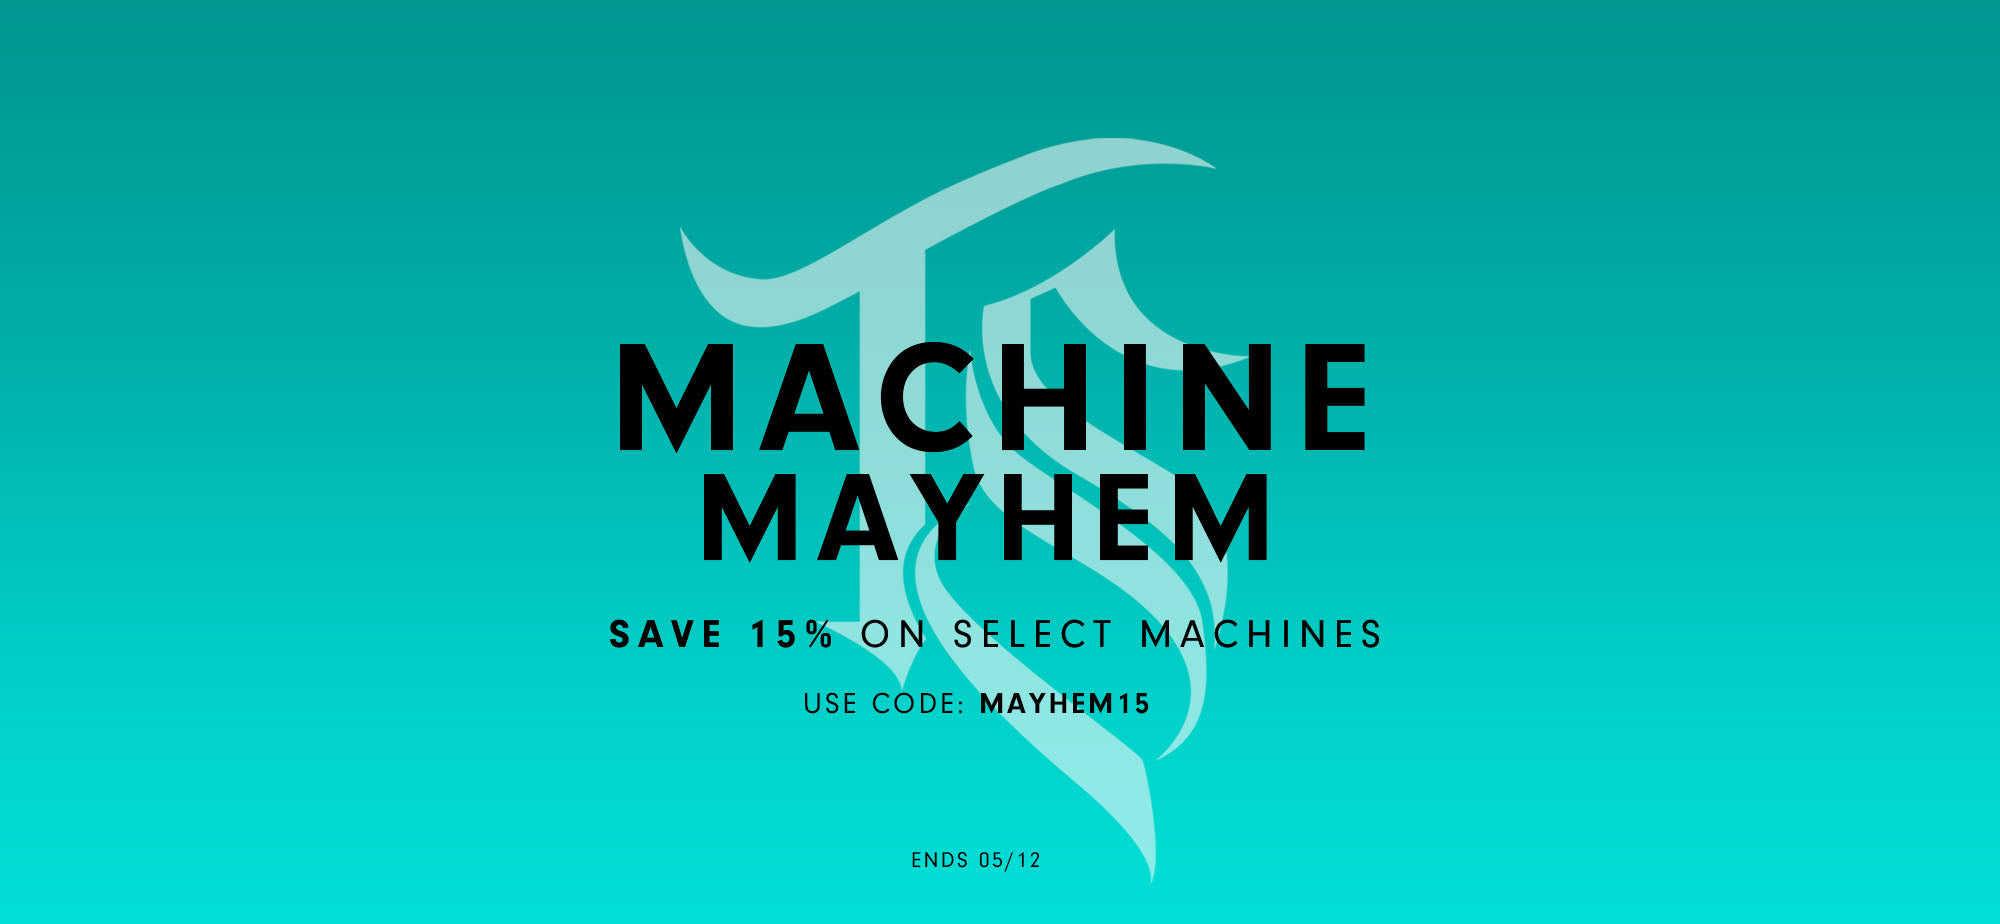 Save 15% on select machines with code MAYHEM15